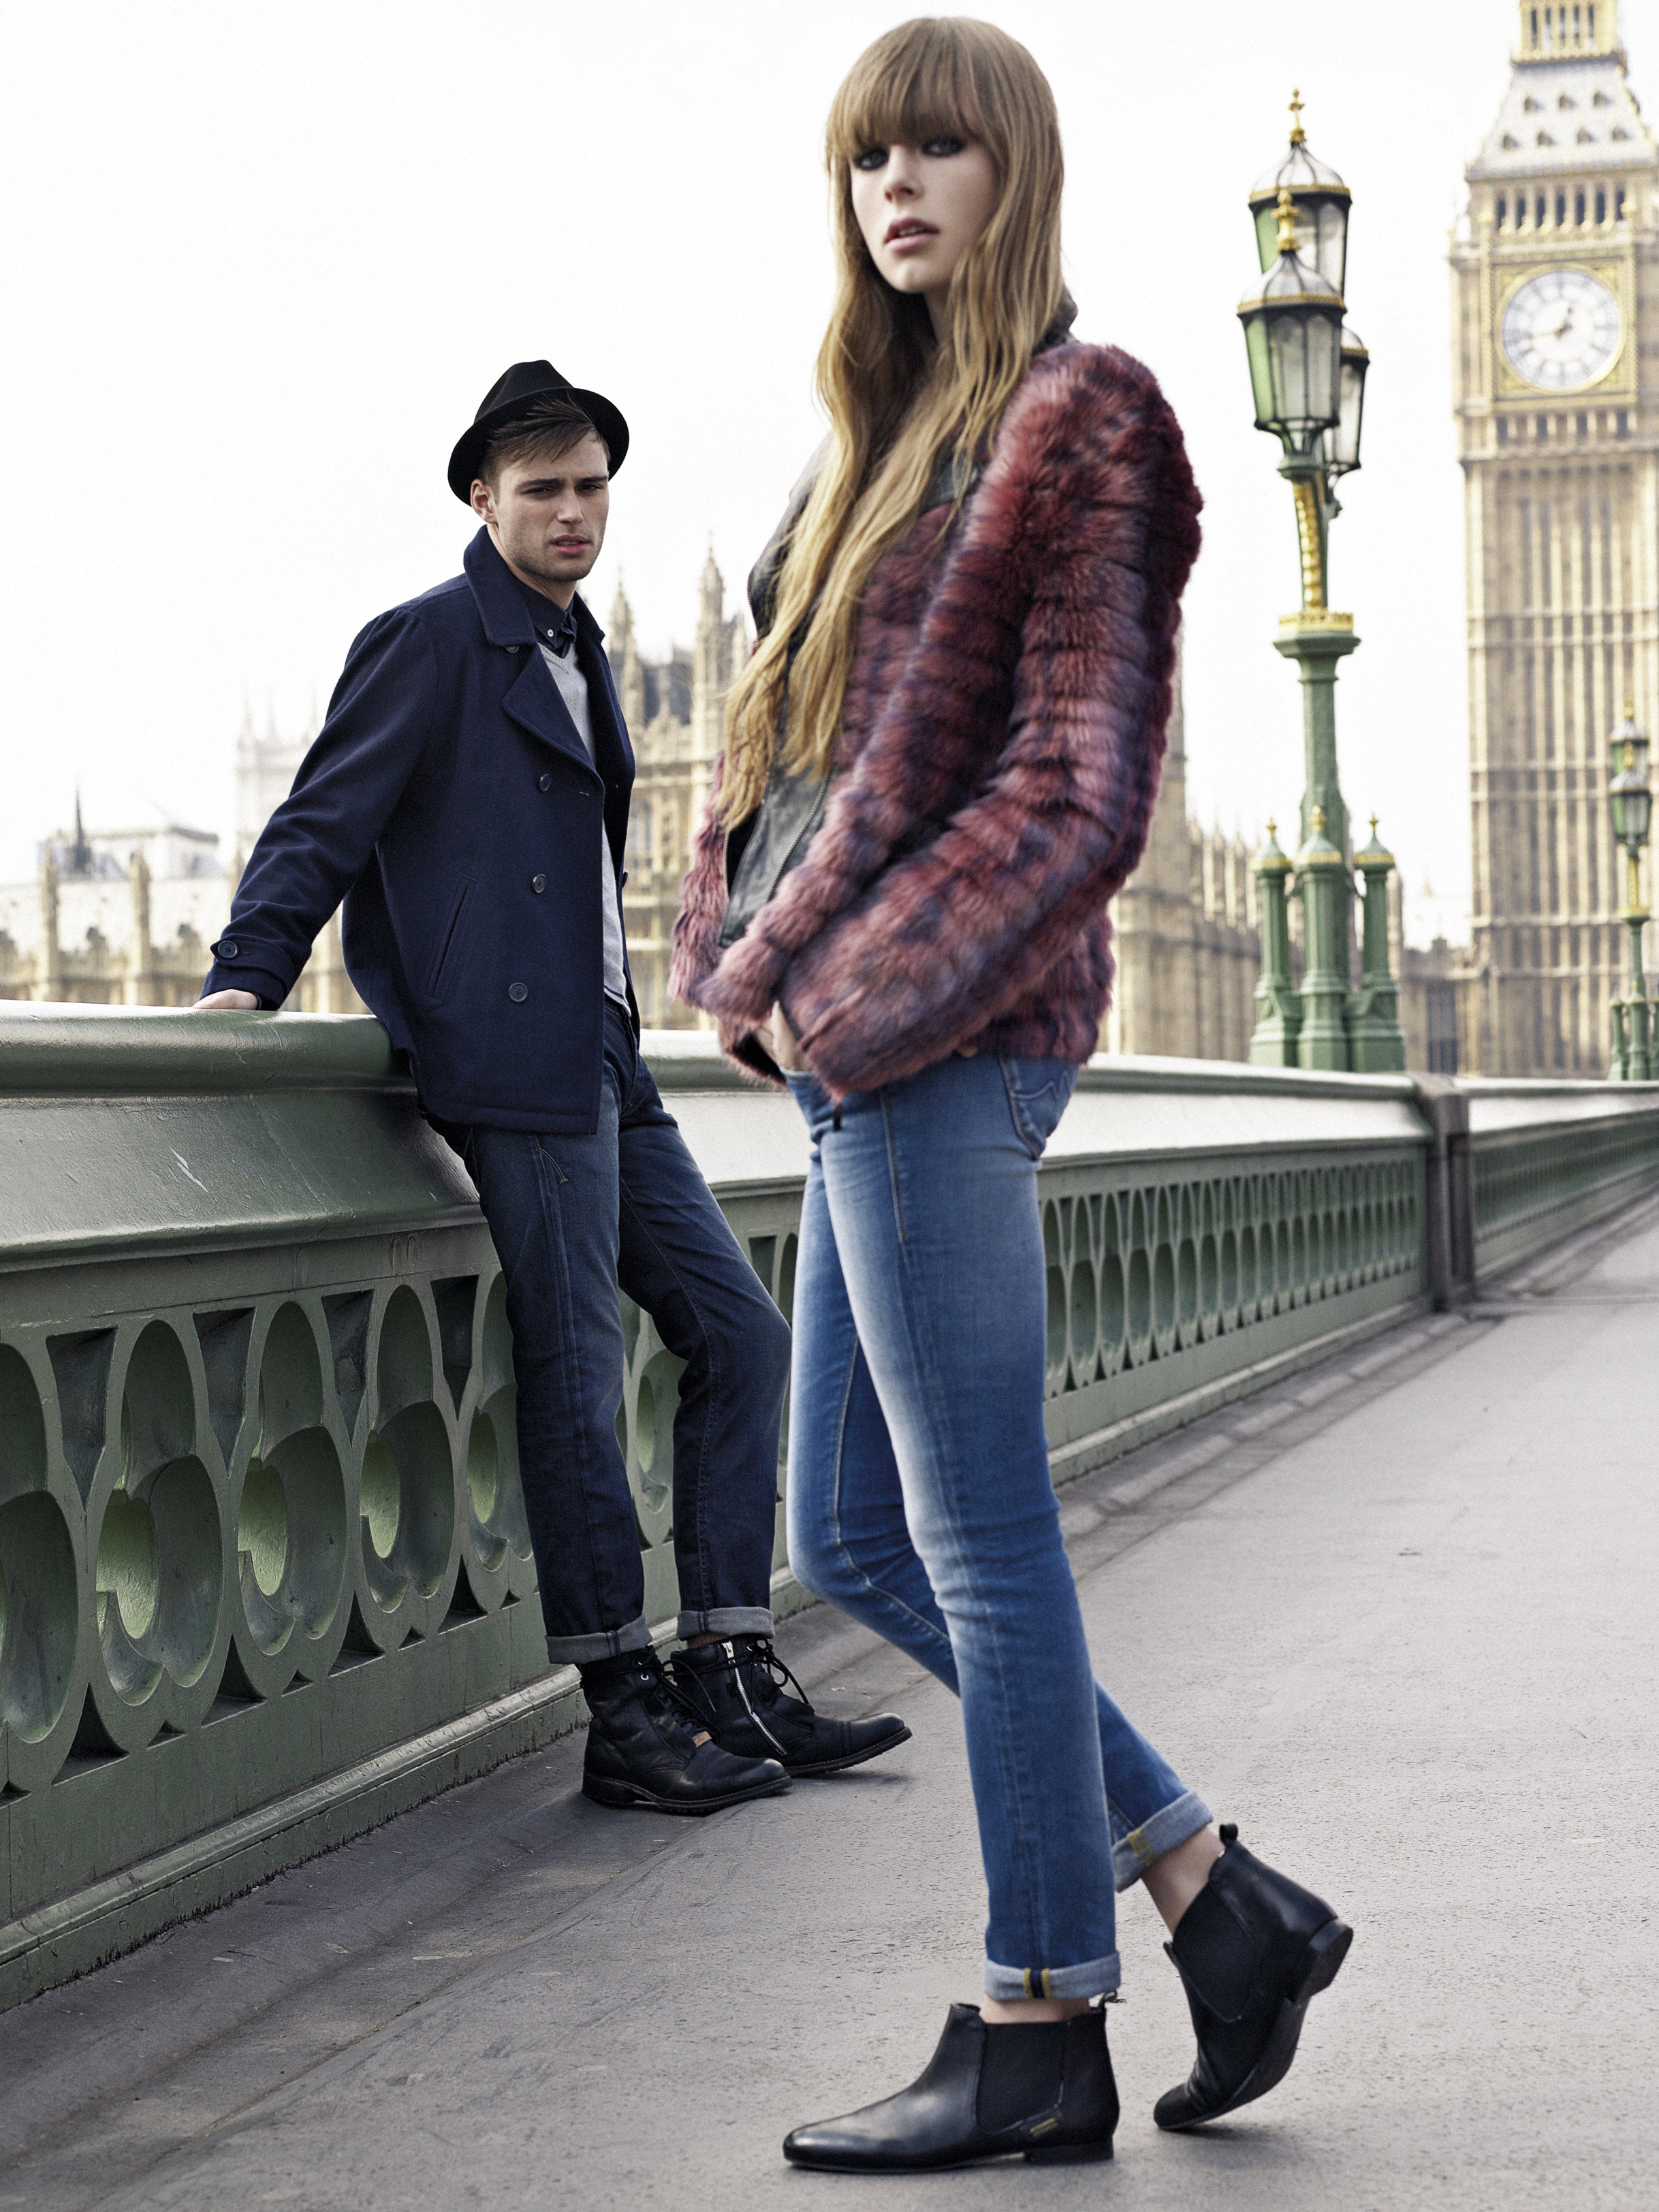 Pepe Jeans AW 2012 Ad Campaign 5